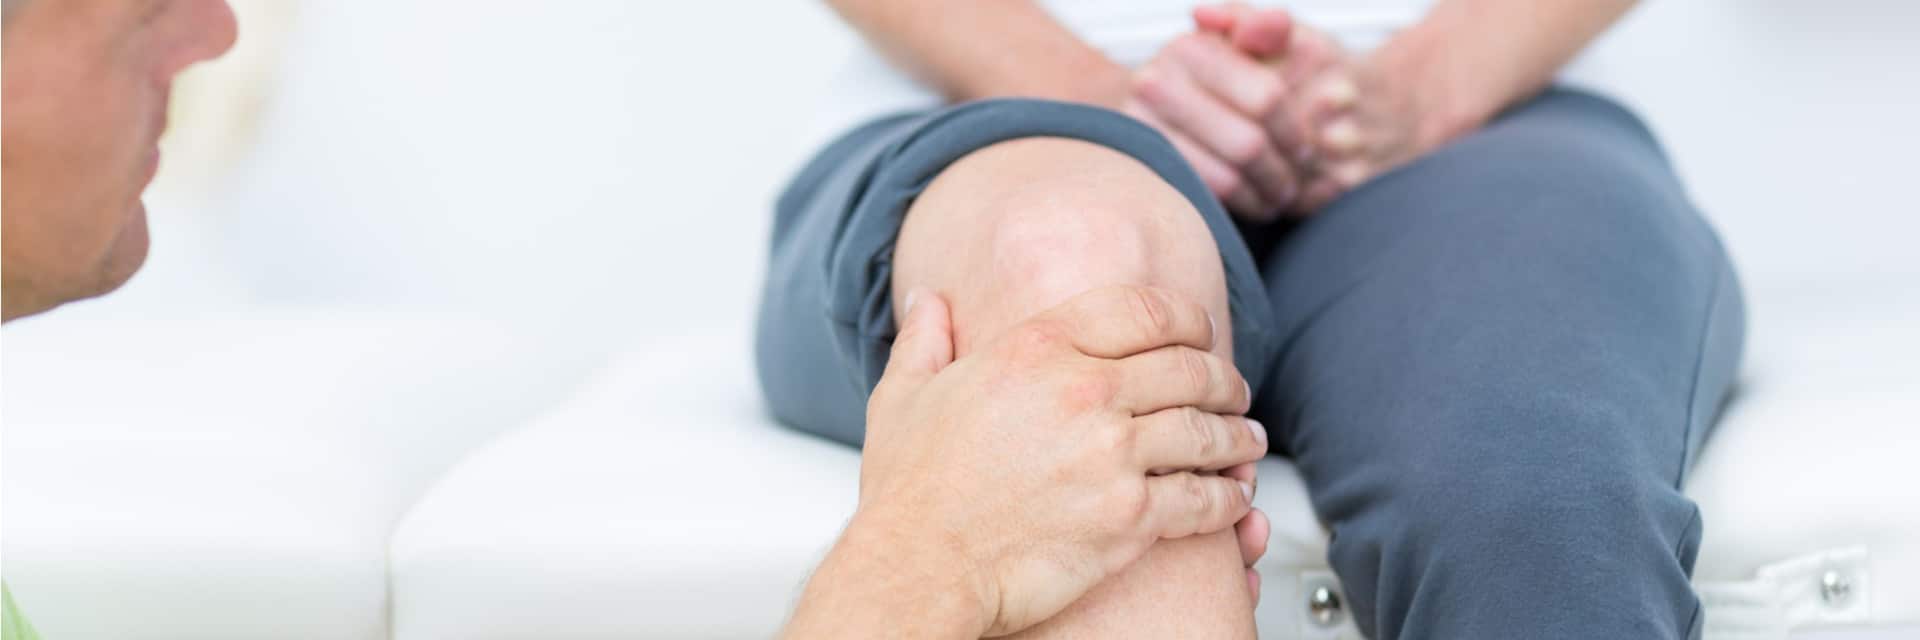 Knee Injuries In Automotive Accidents